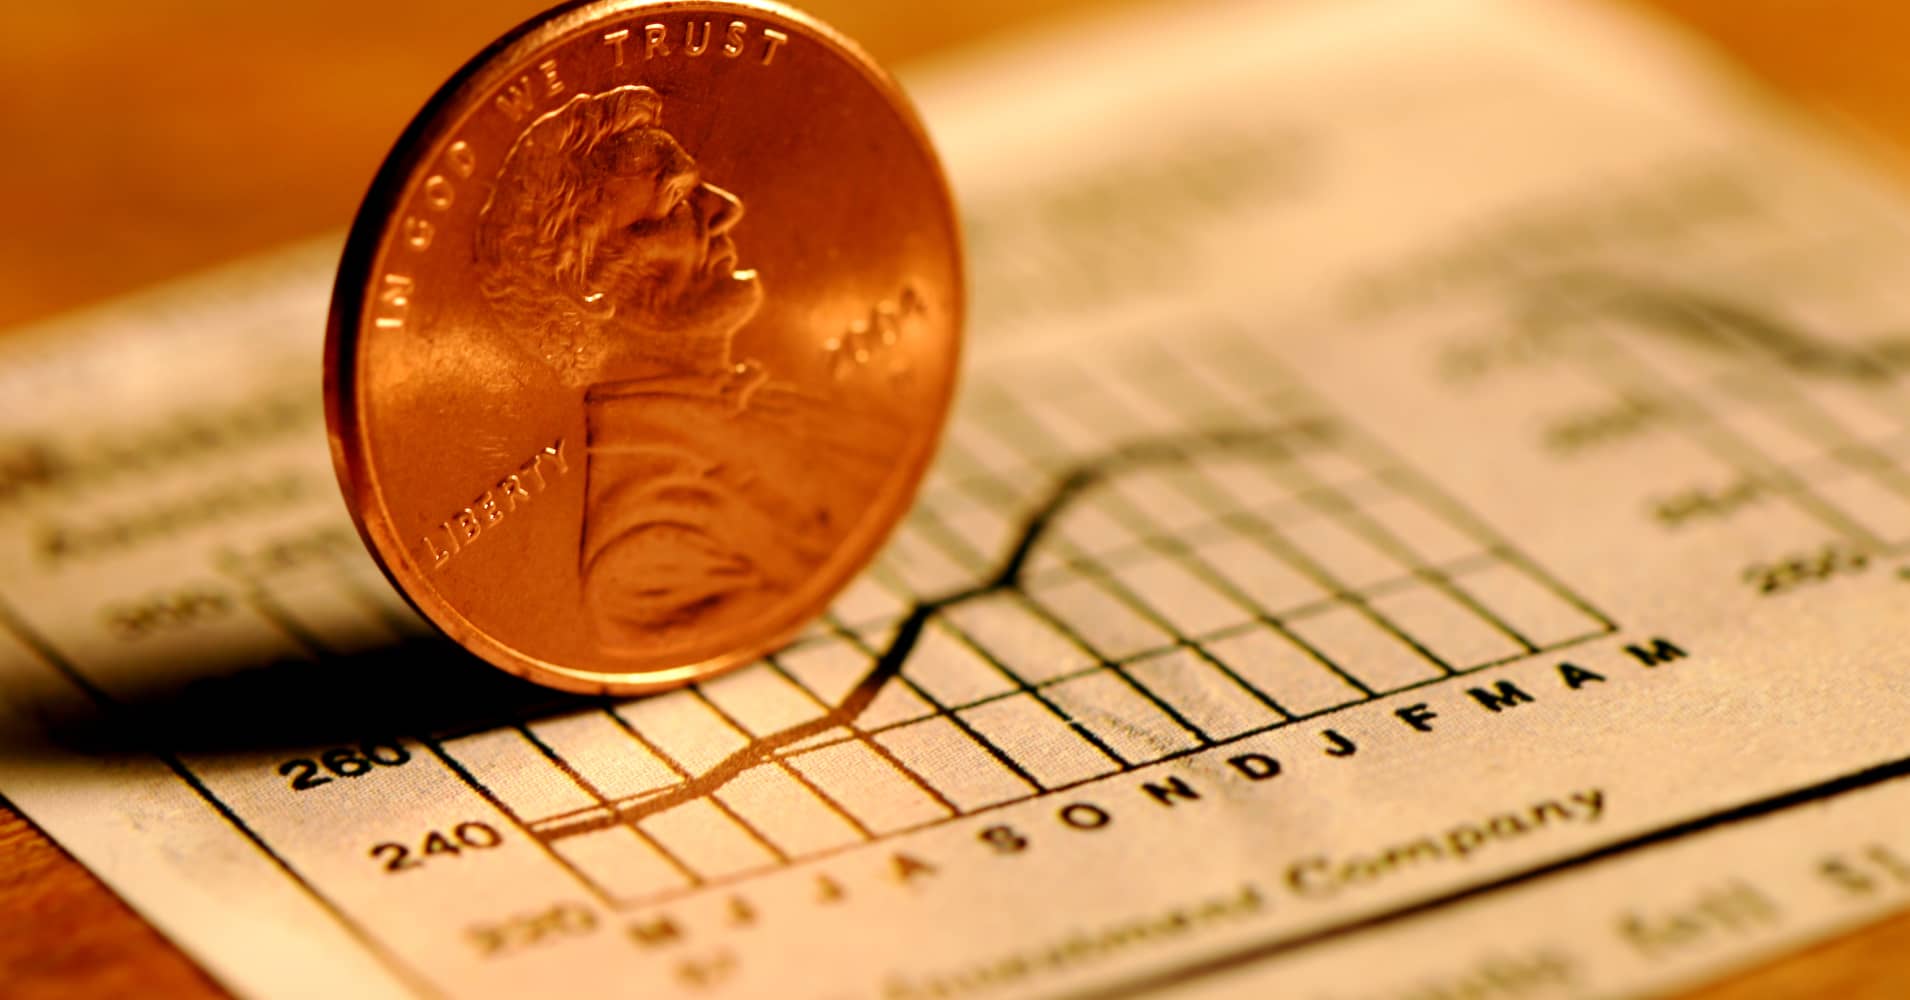 Penny stock soars to $6B, and even the auditor is perplexed